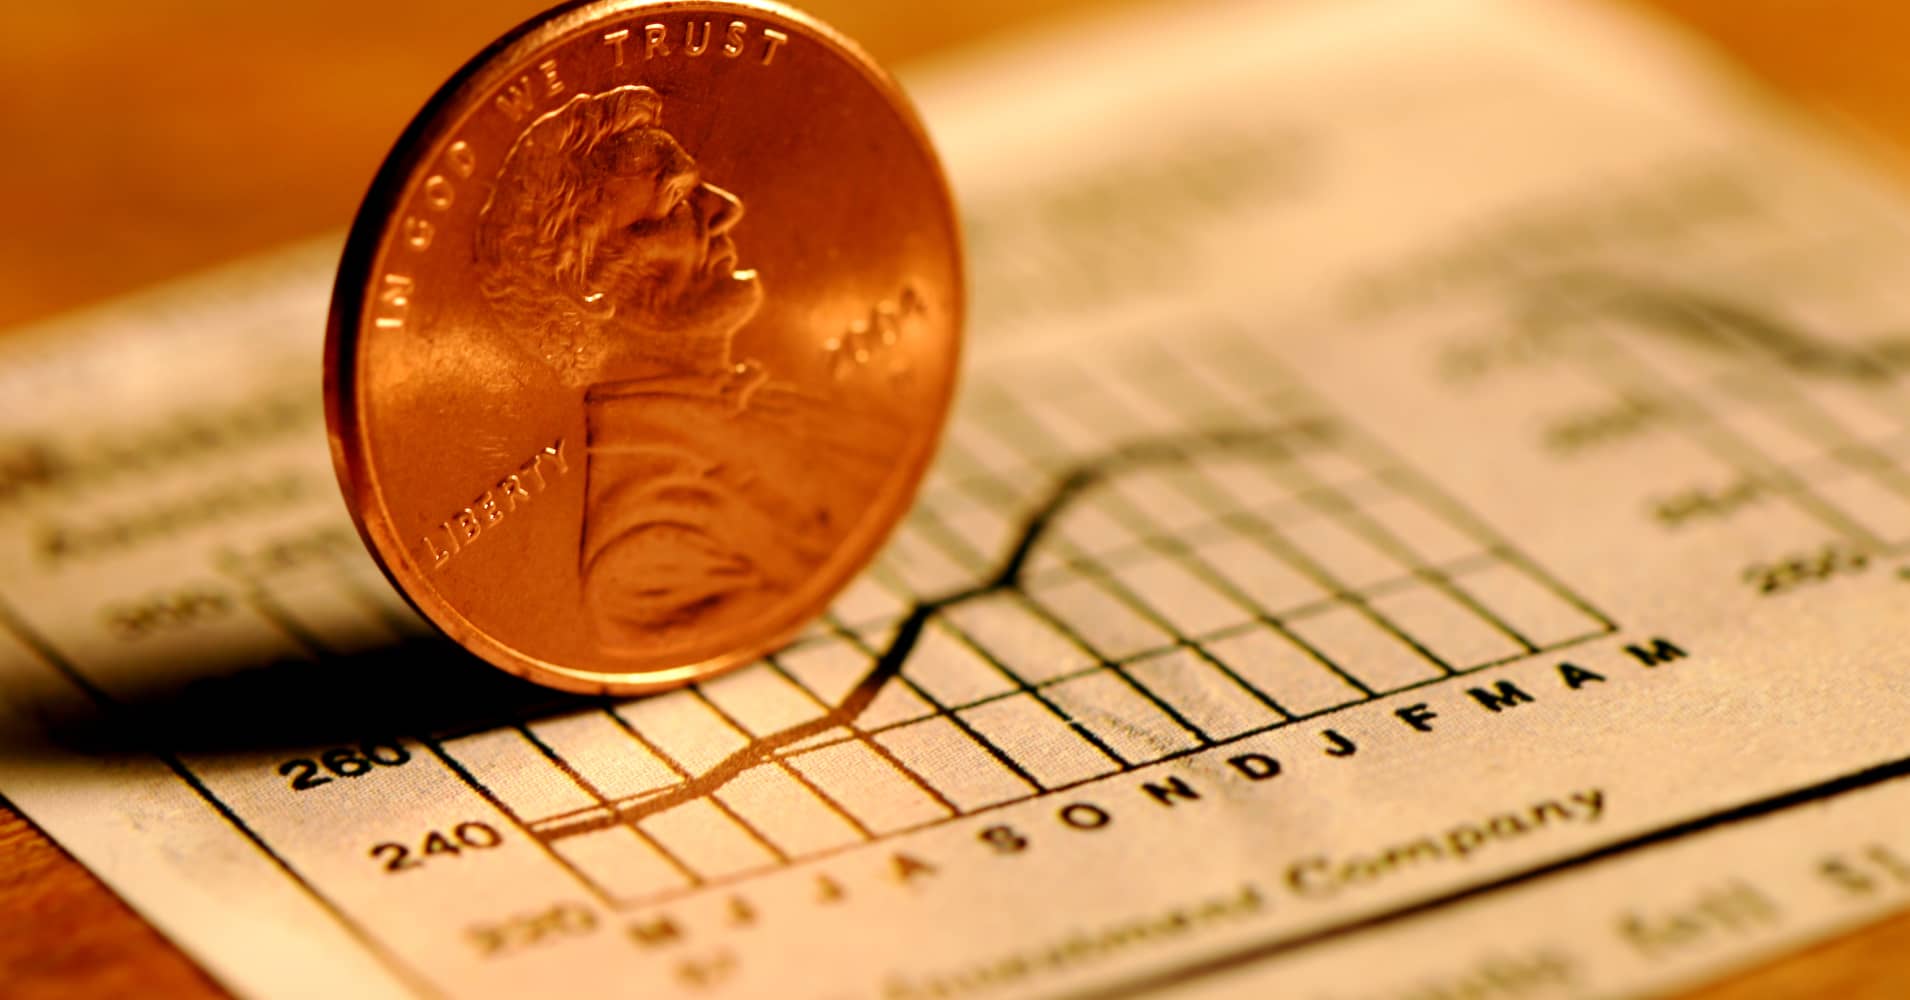 Penny stock soars to $6B, and even the auditor is perplexed